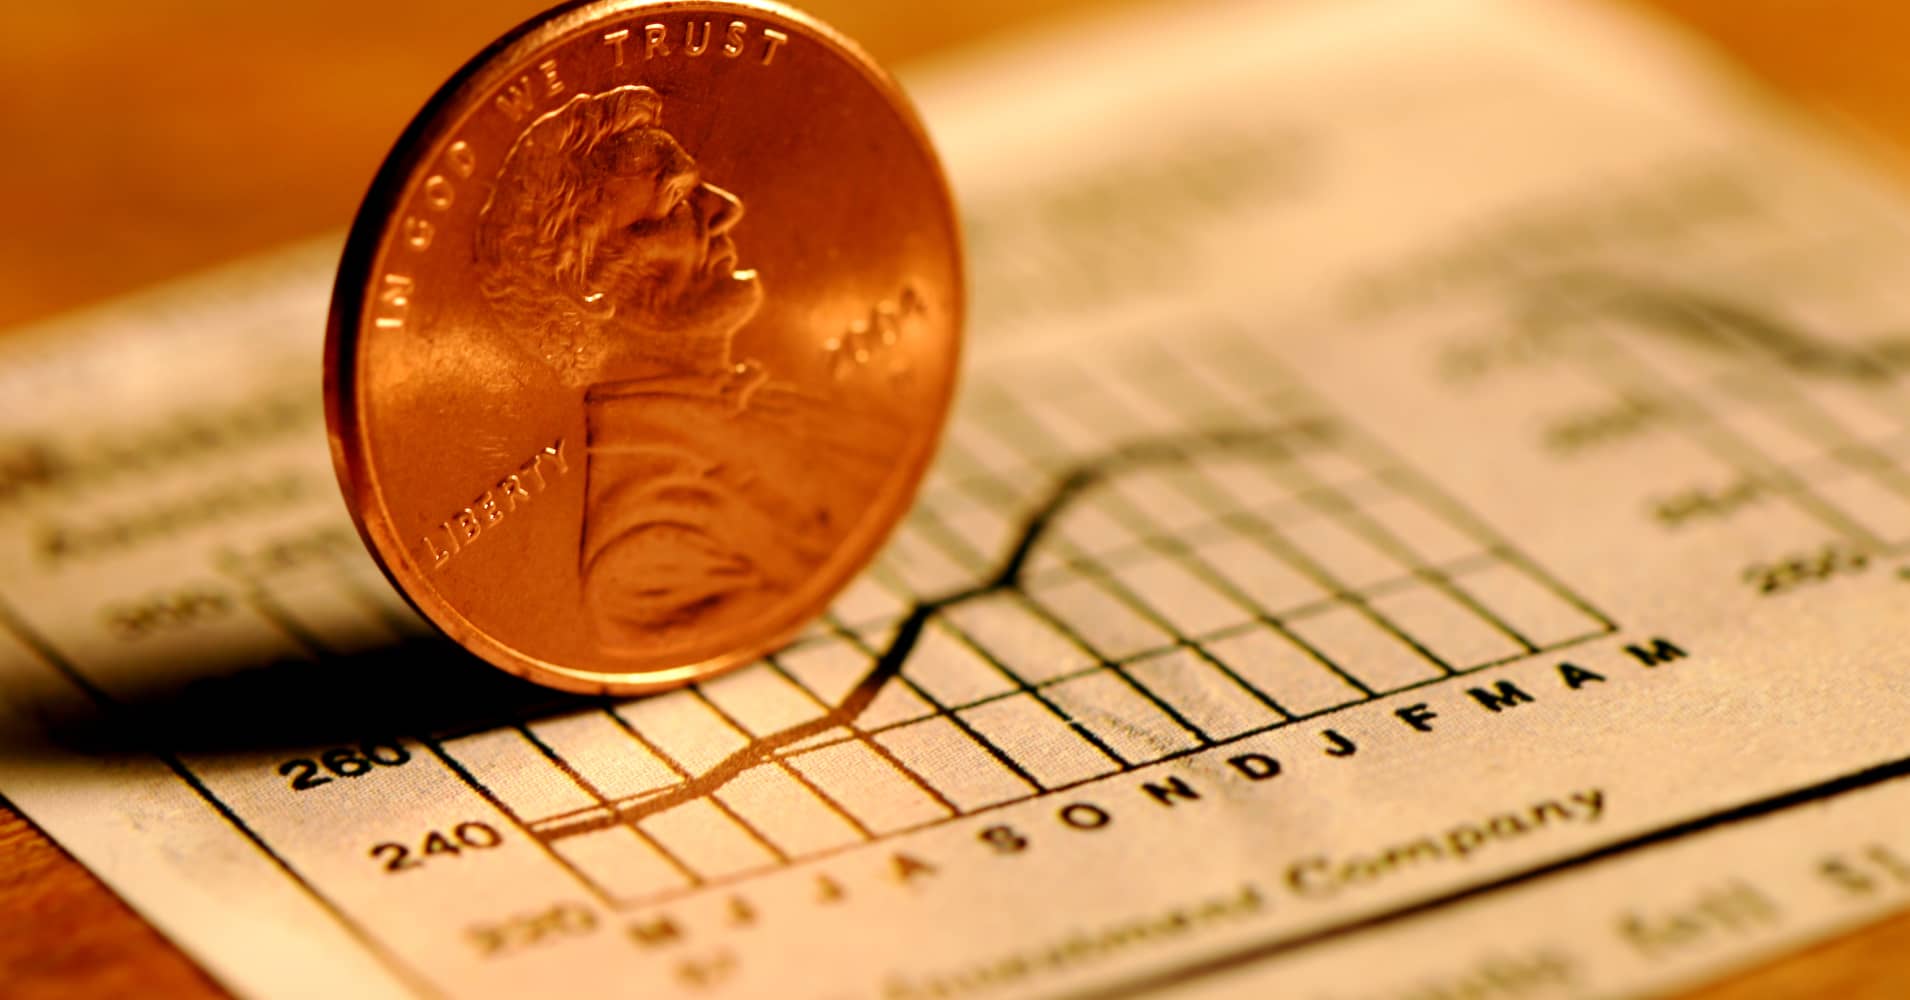 Penny stock soars to $6B, and even the auditor is perplexed